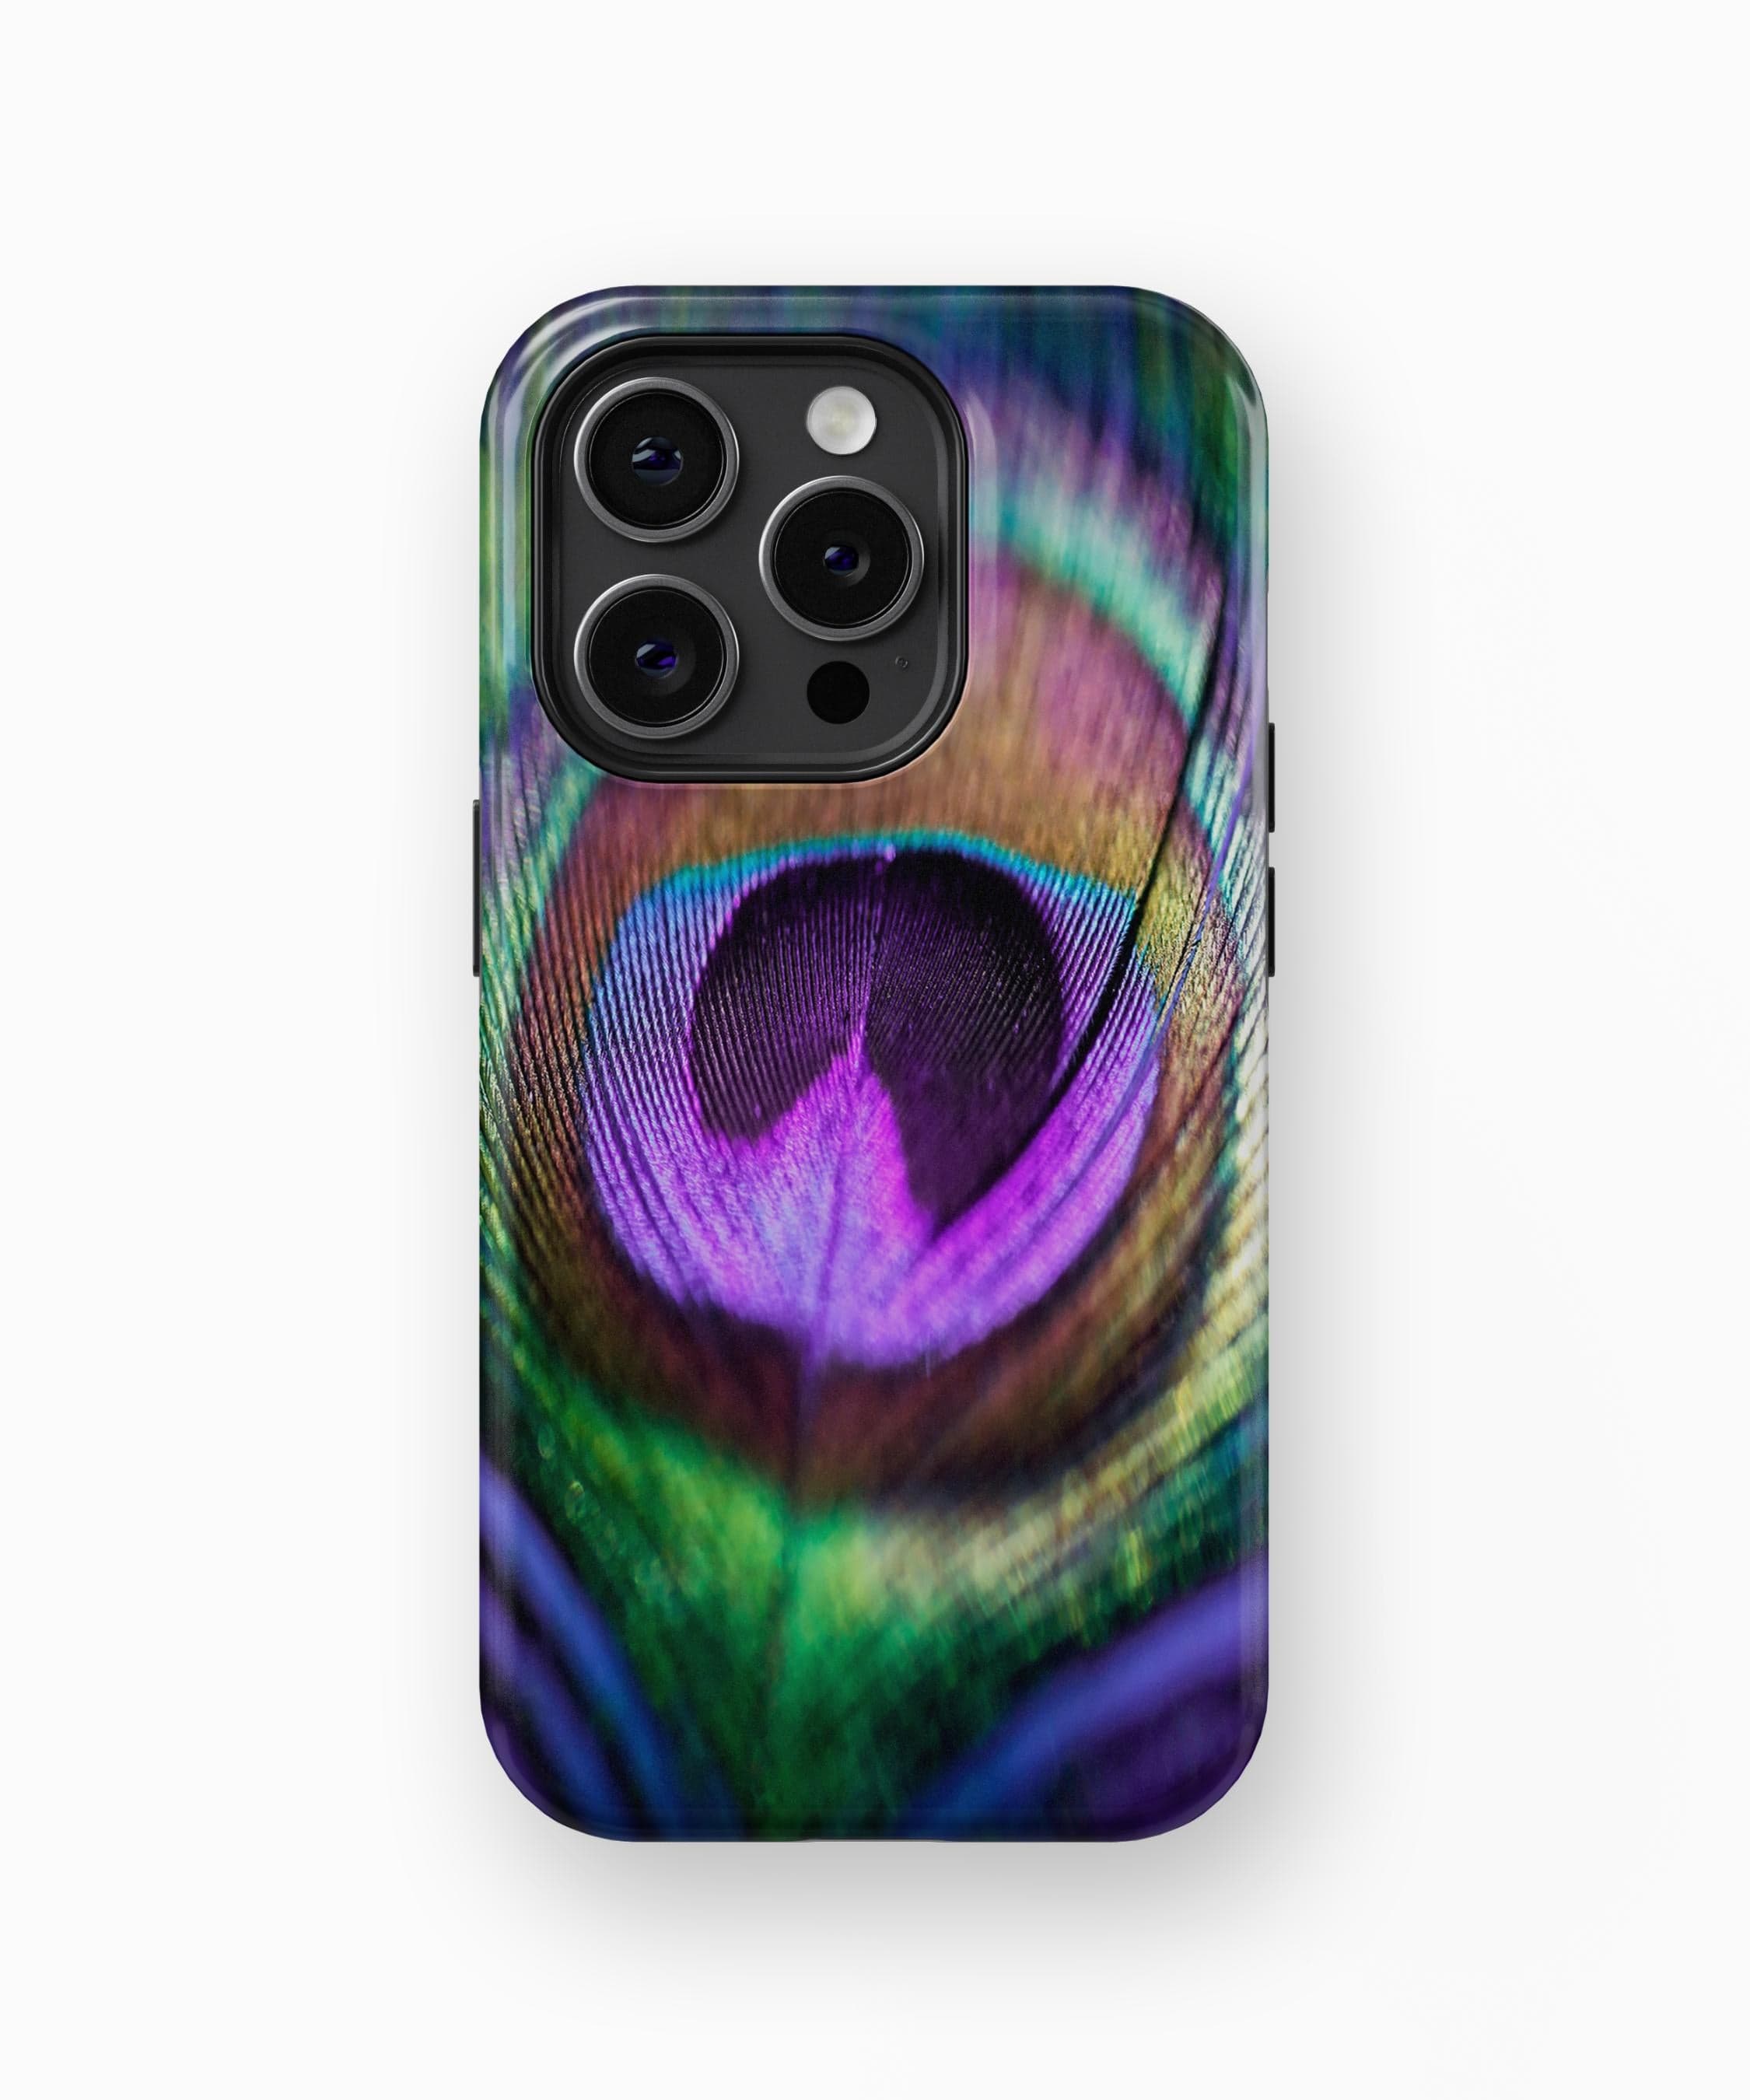 Peacock Feather iPhone Case